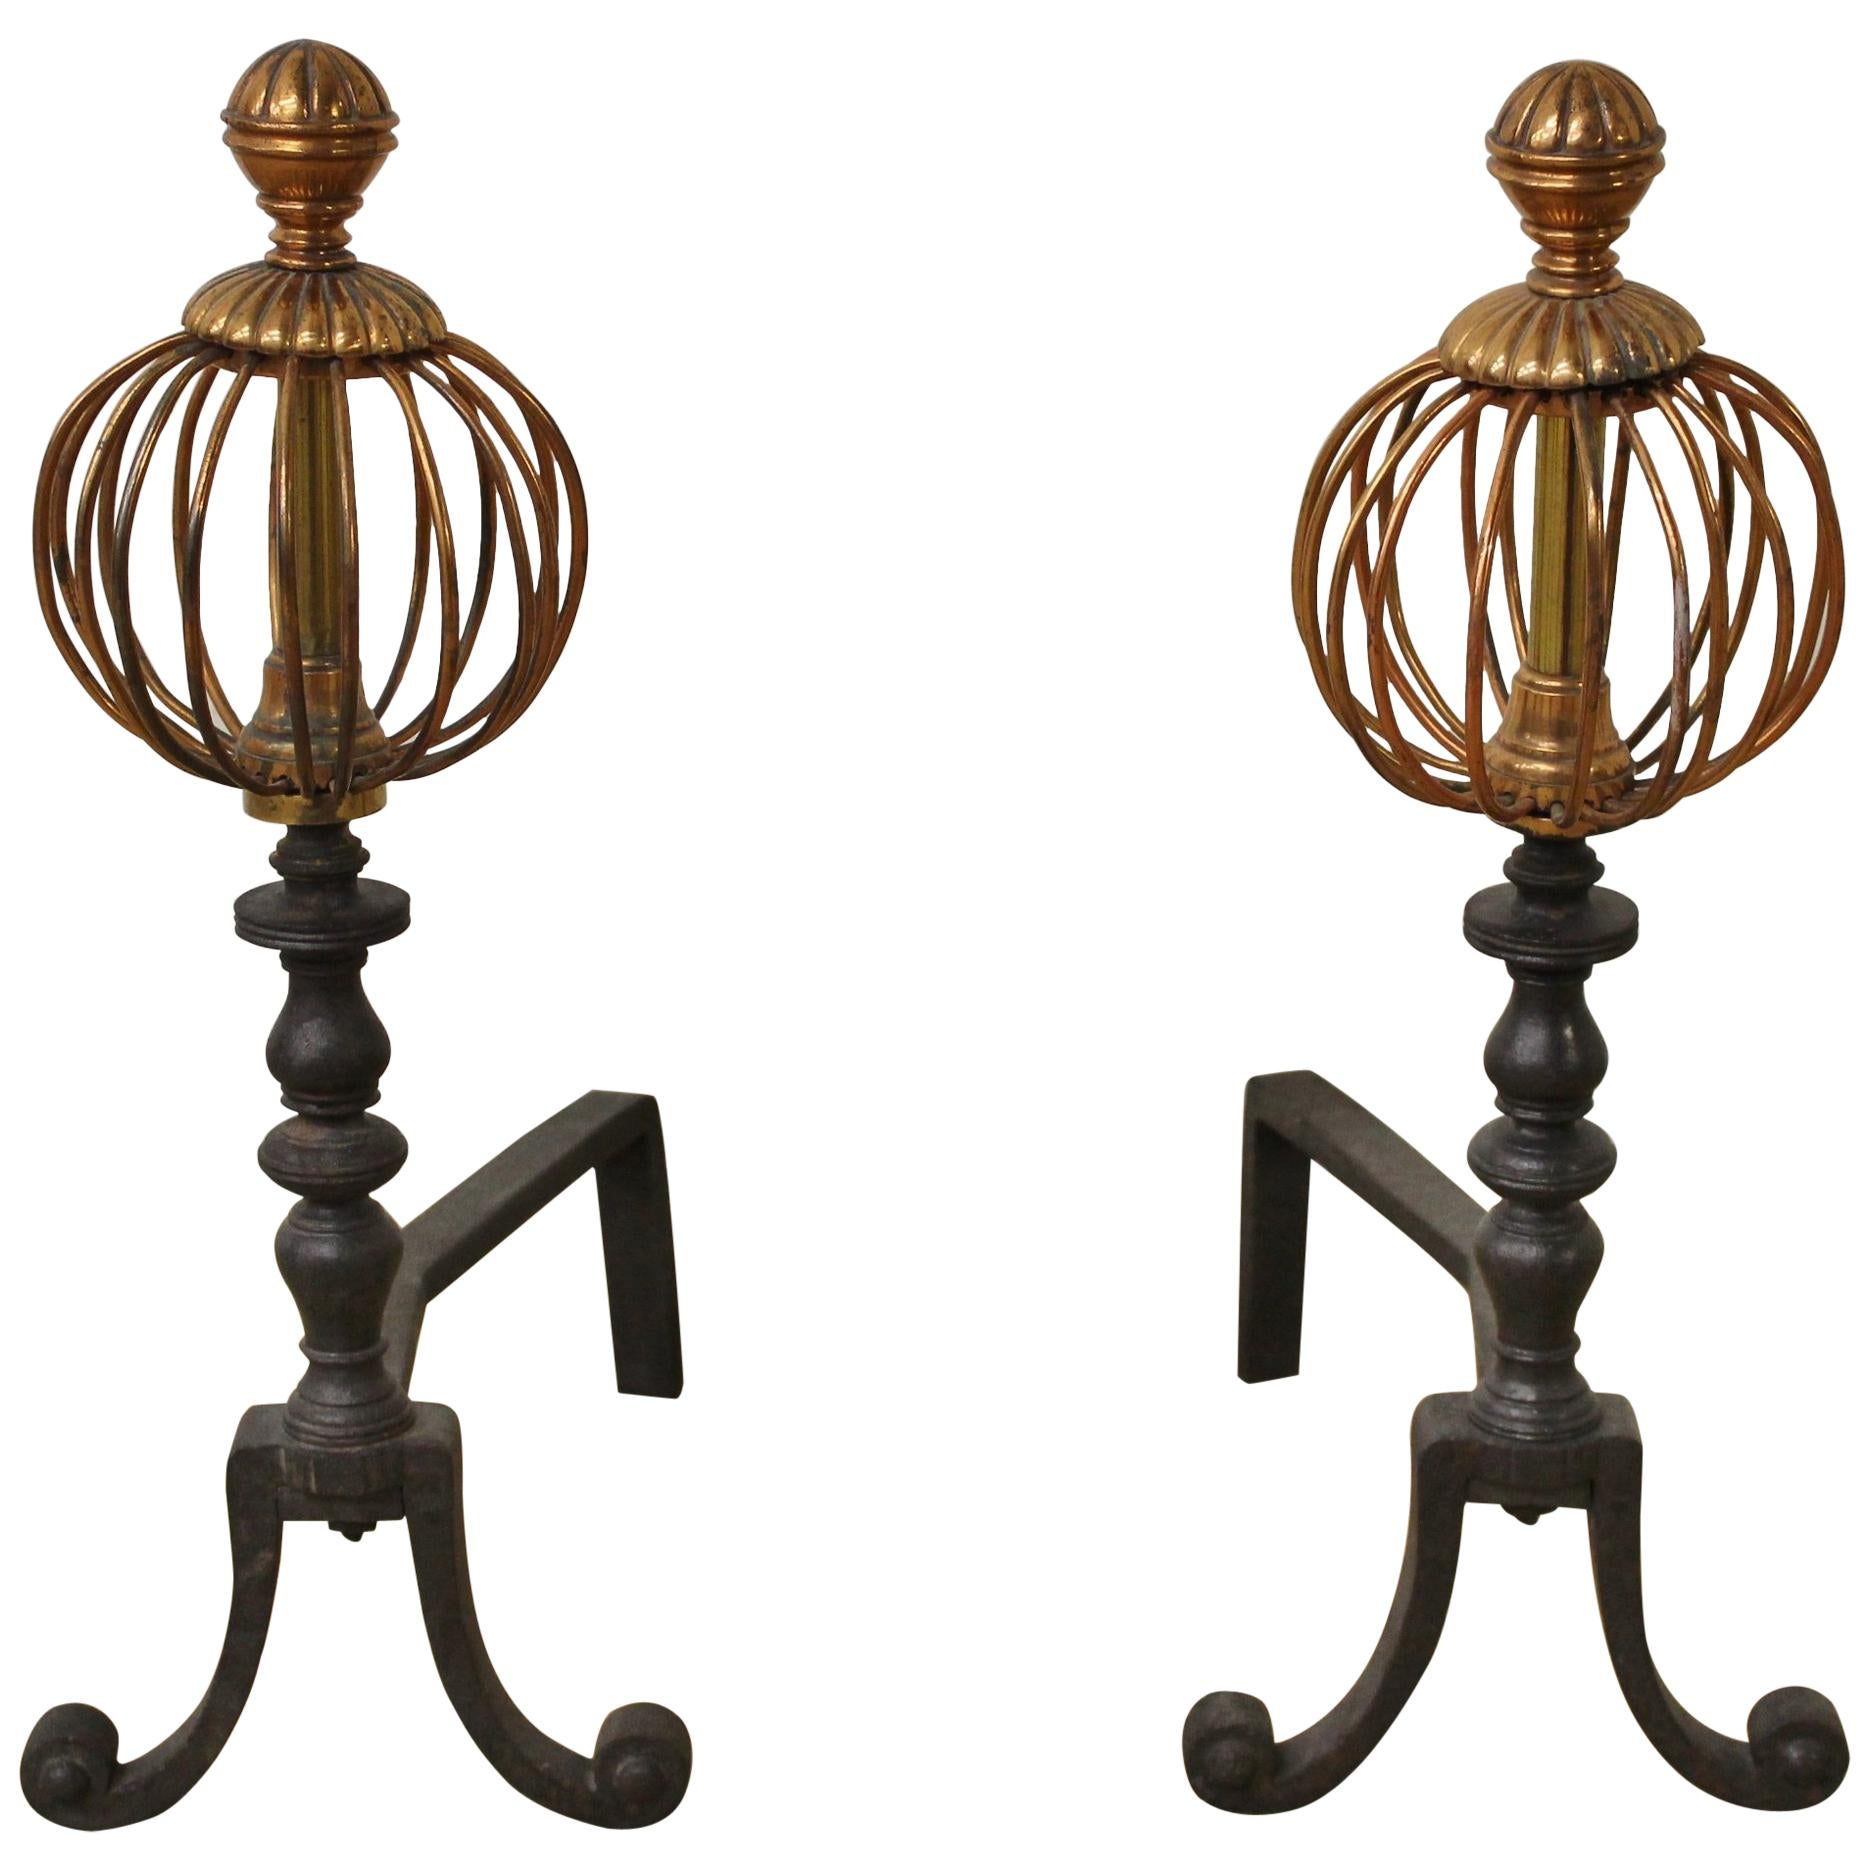 Pair of Early 19th Century Fire Dogs For Sale